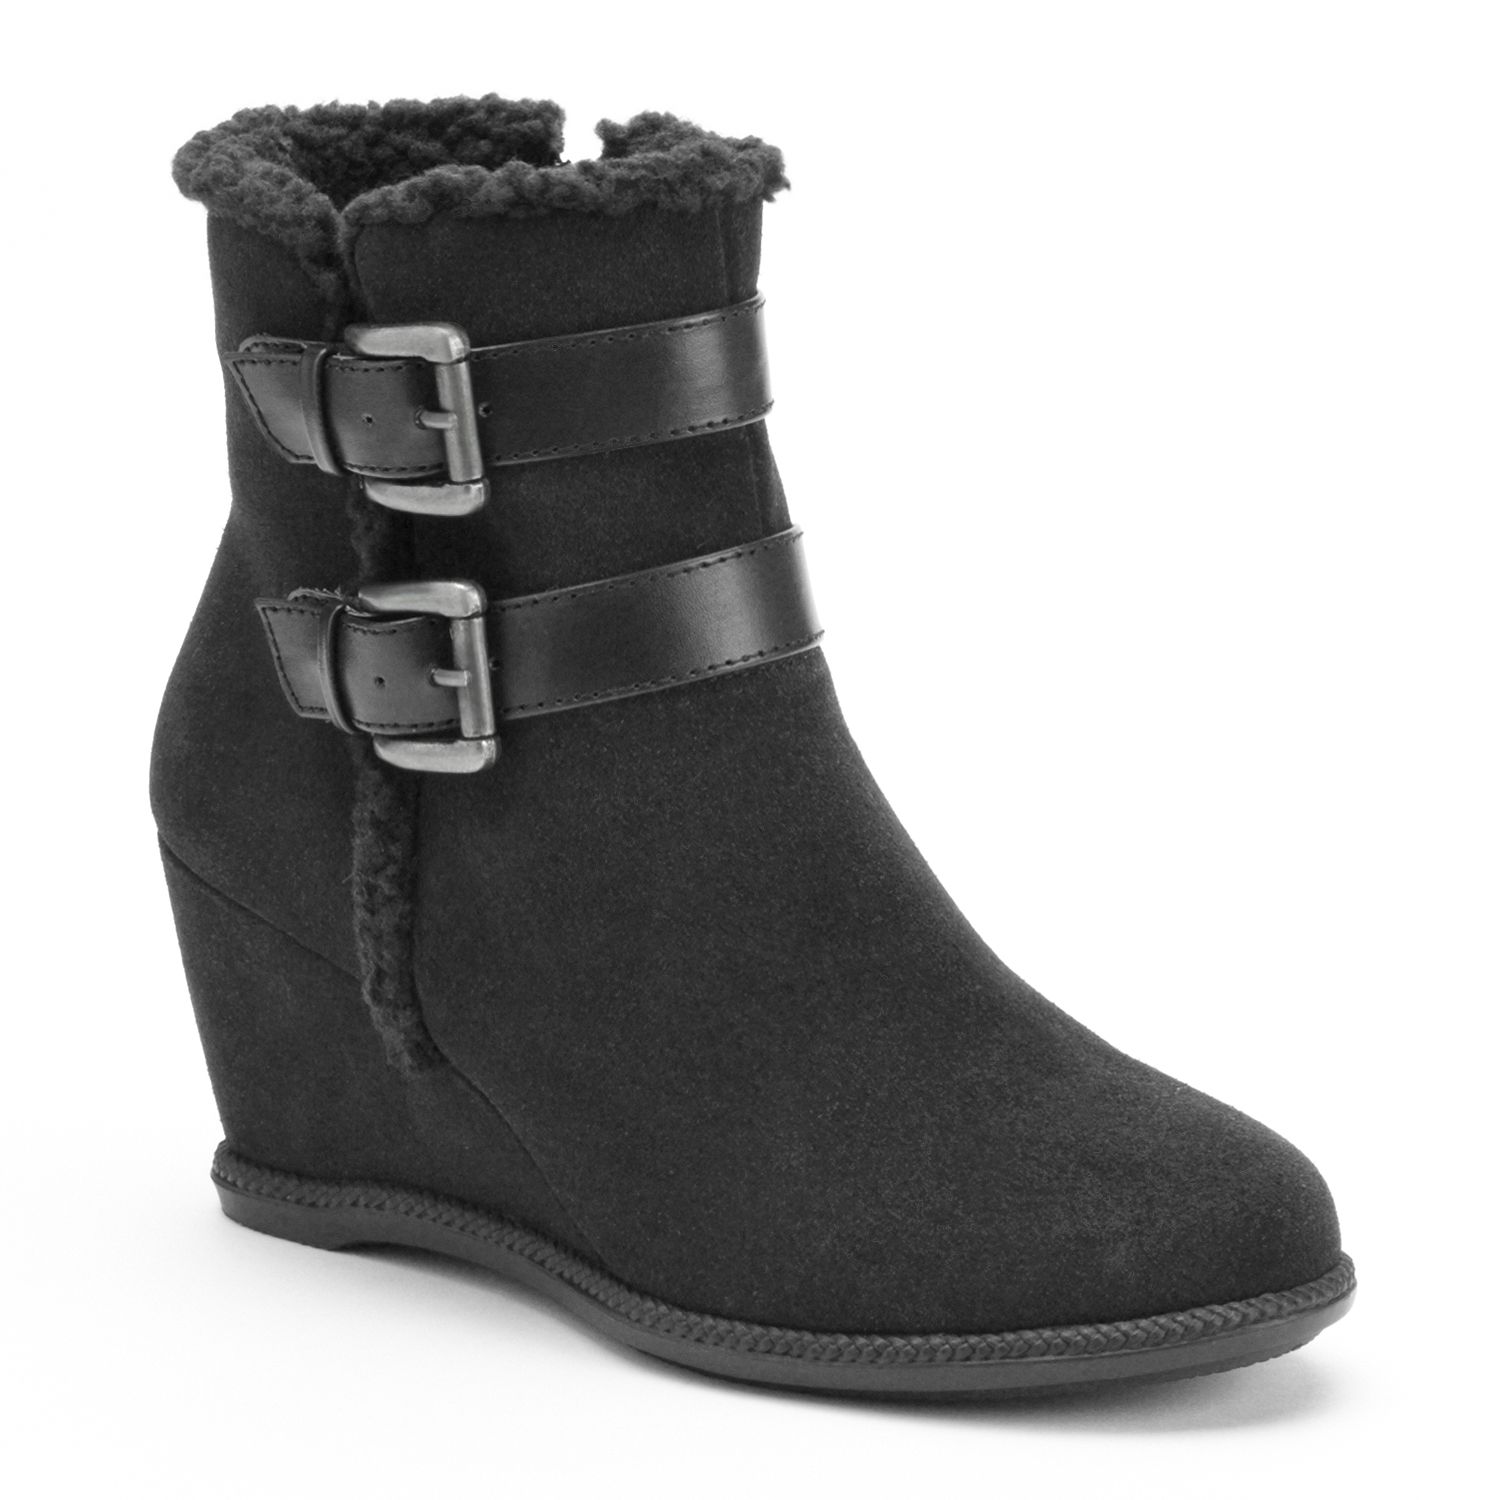 dune pericle boots